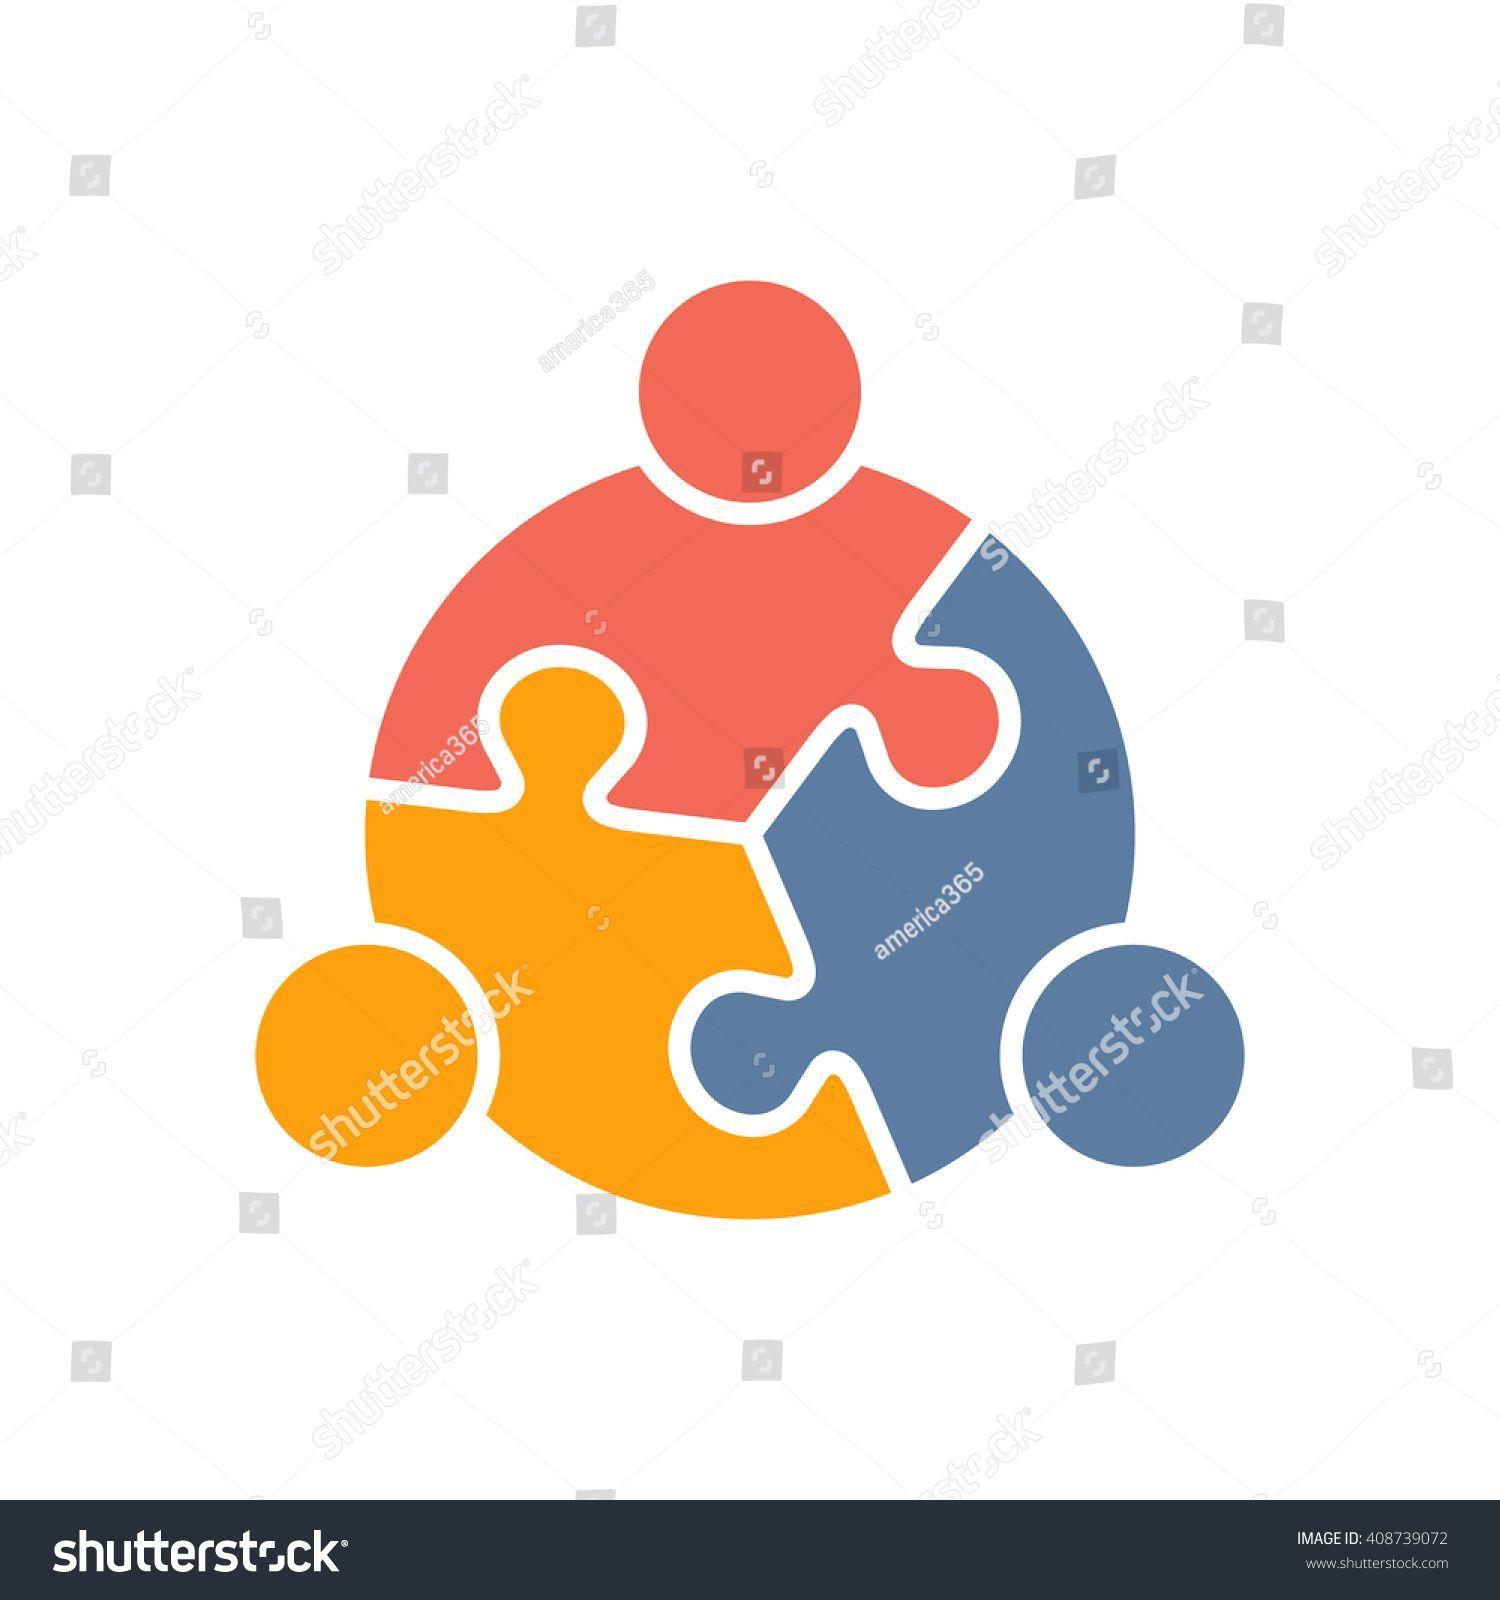 Three- Person Logo - Teamwork People puzzle three pieces #people #social #internet ...